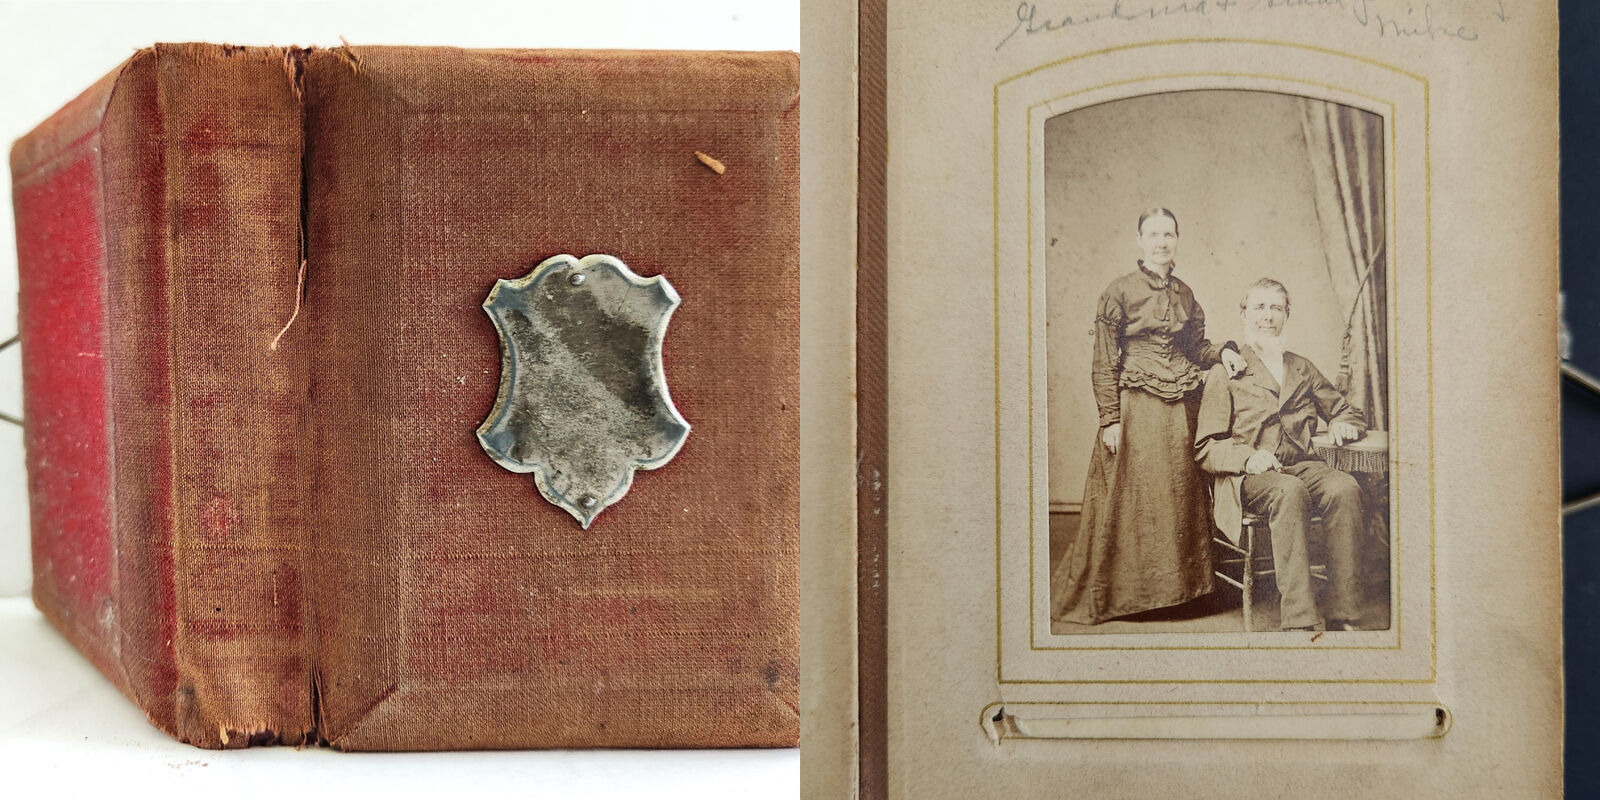 Primary image for antique EALY PHOTOGRAPH ALBUM henderson huntingdon pa cdv tintype